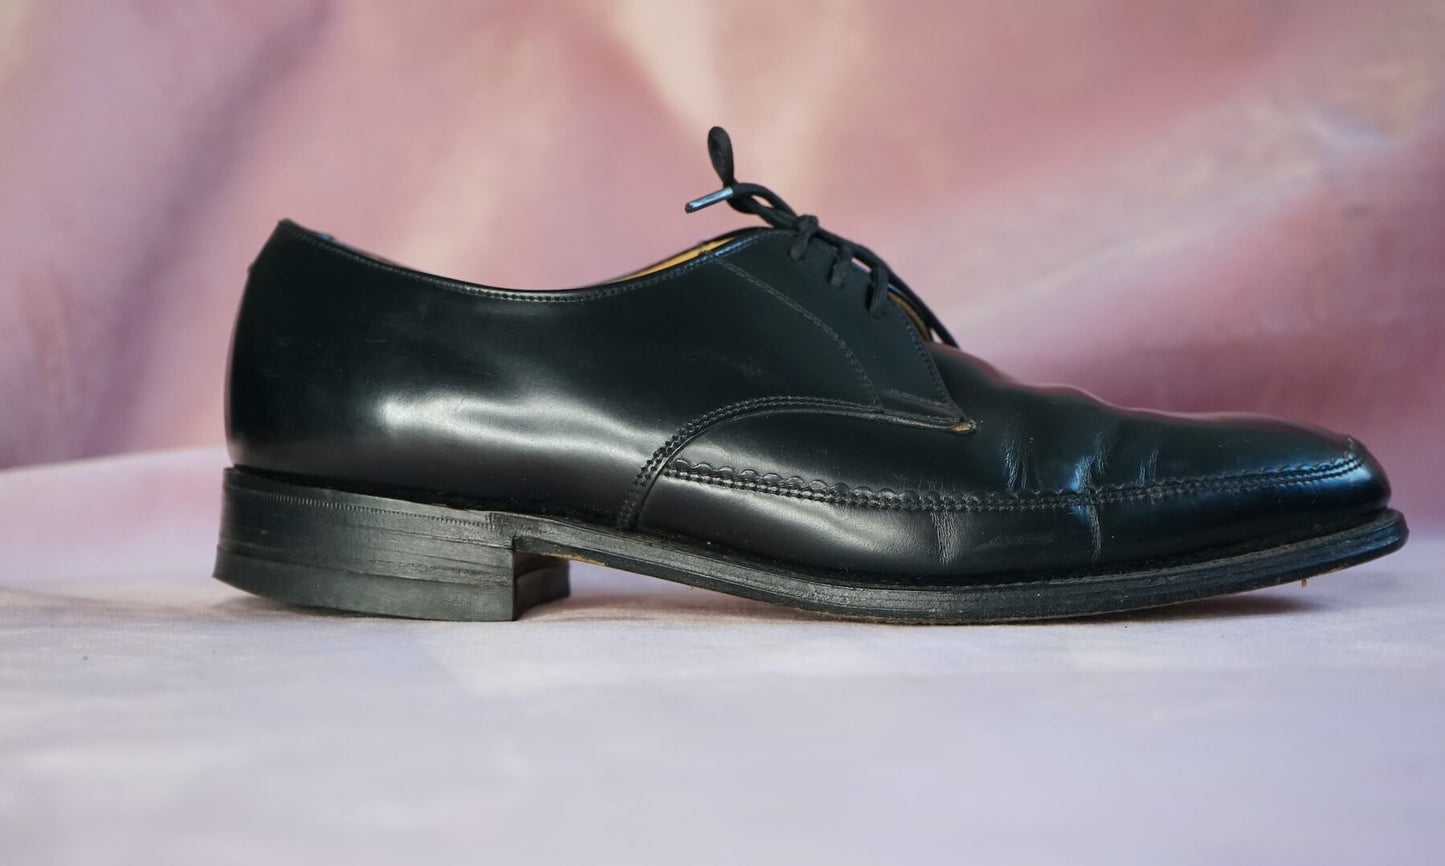 Loake Vintage Black Leather Lace Up Oxford Brogue Shoes Size 8/41